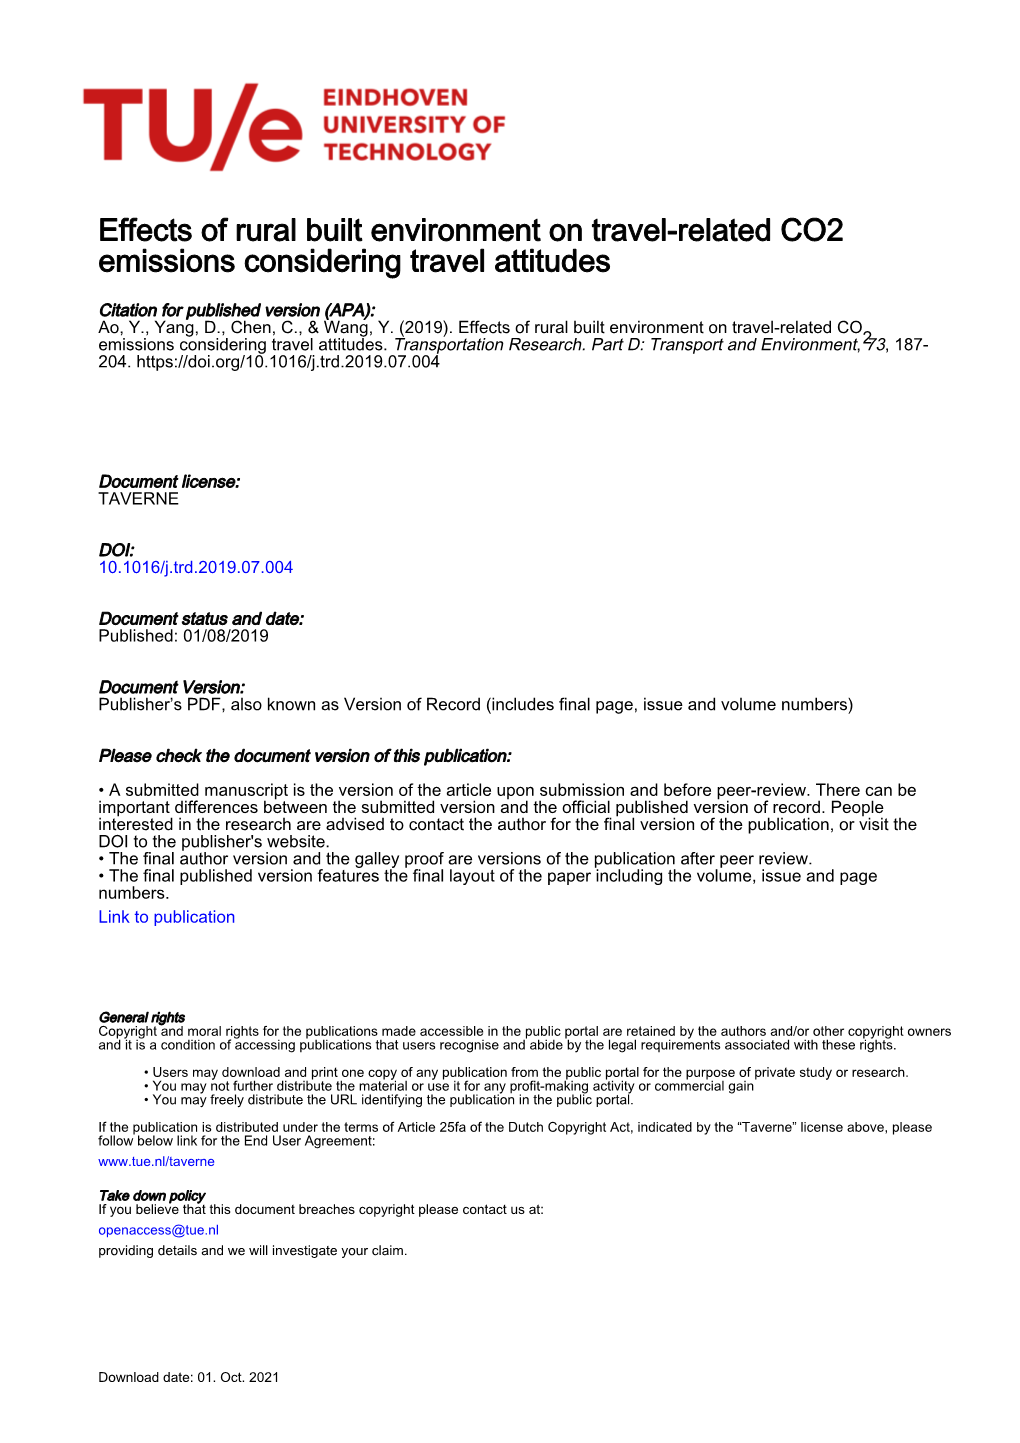 Effects of Rural Built Environment on Travel-Related CO2 Emissions Considering Travel Attitudes